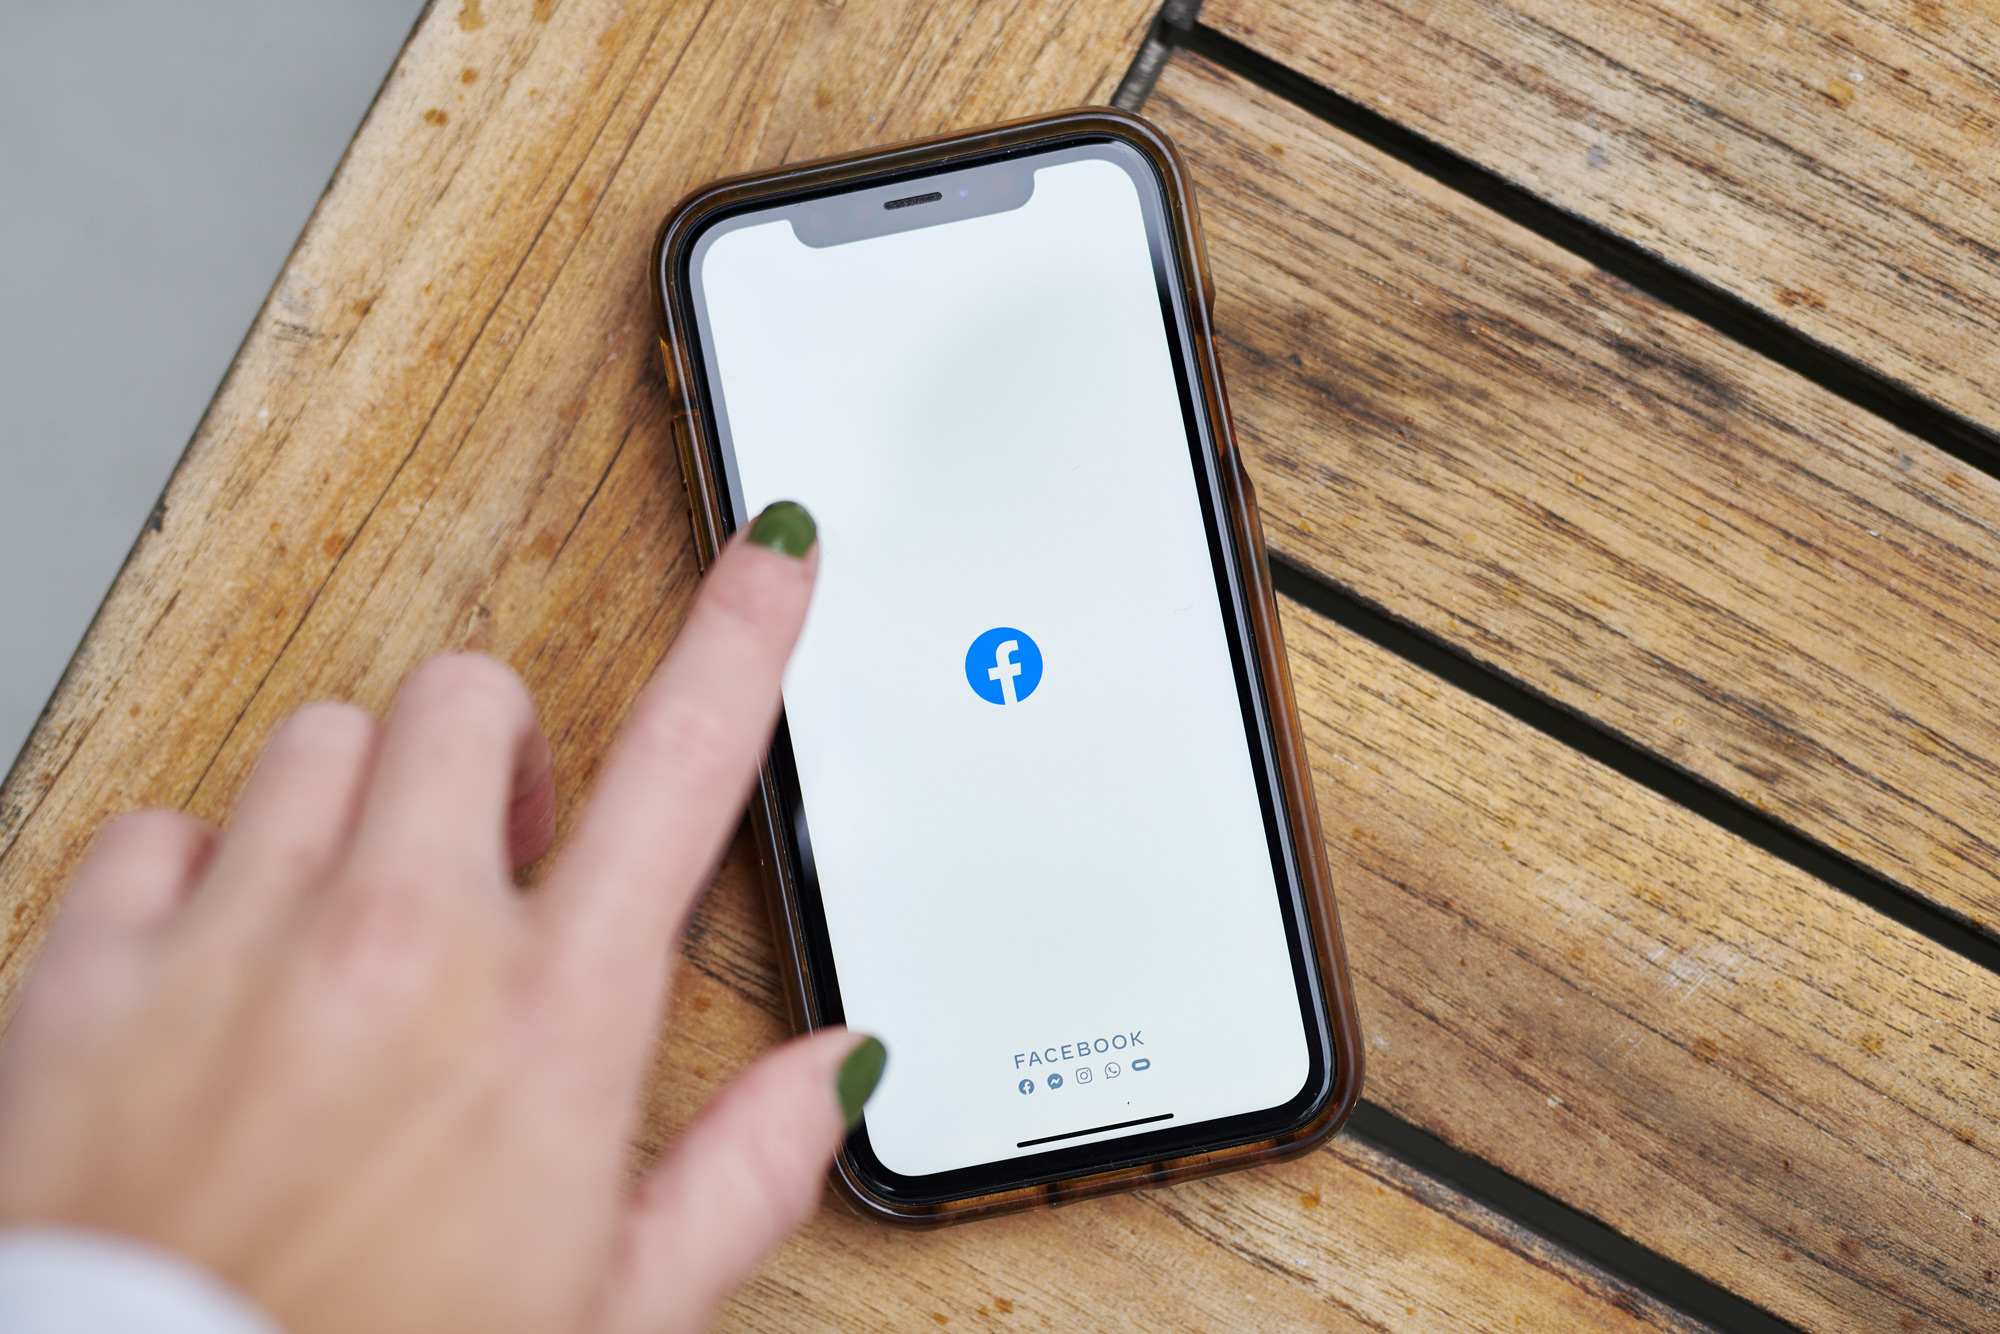 The logo for Facebook is displayed on a smartphone.